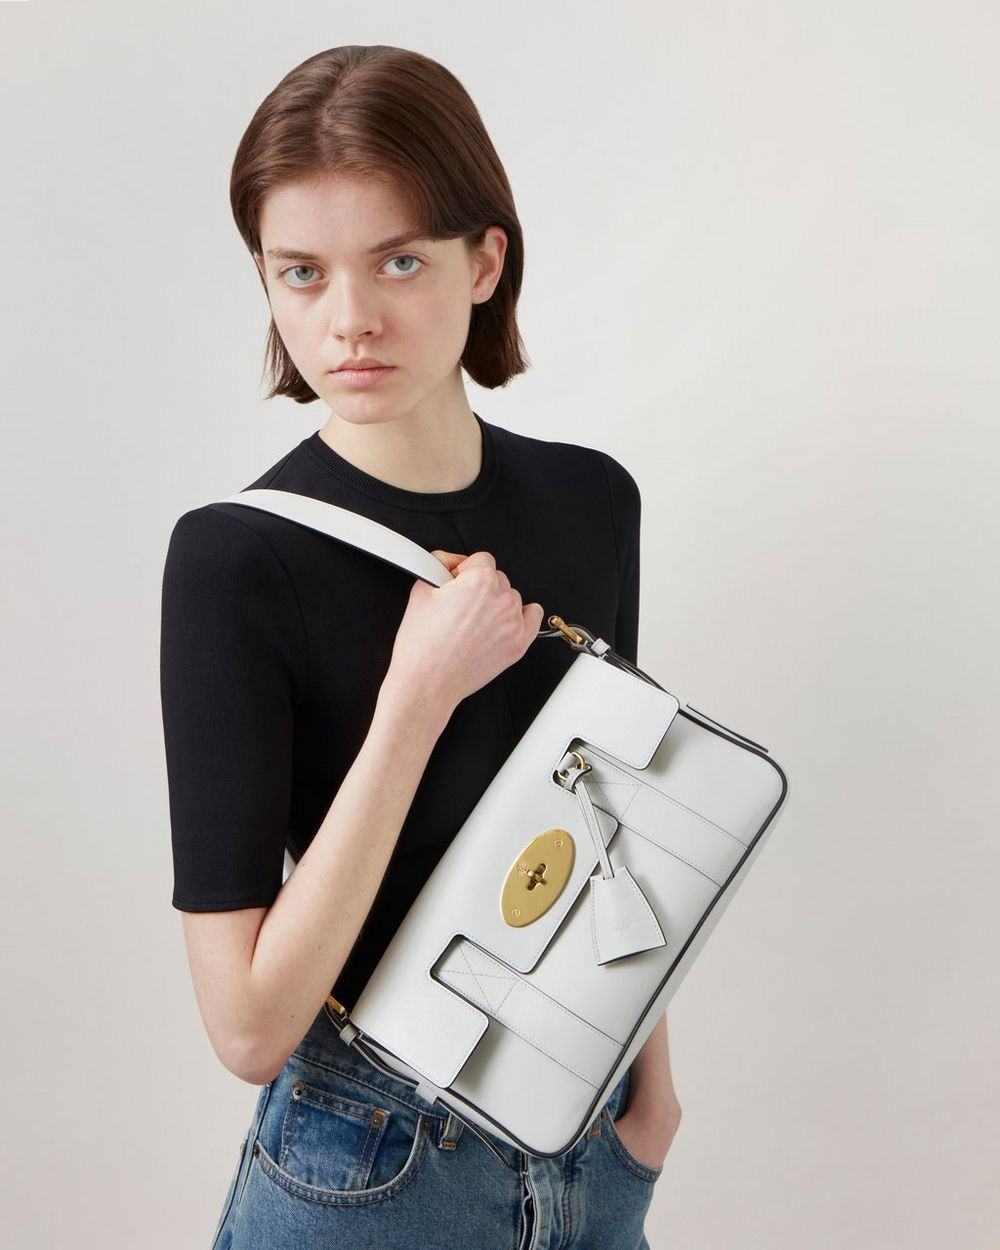 Mulberry Bayswater Bag: The Original It Bag Is 20, So Here Are Its